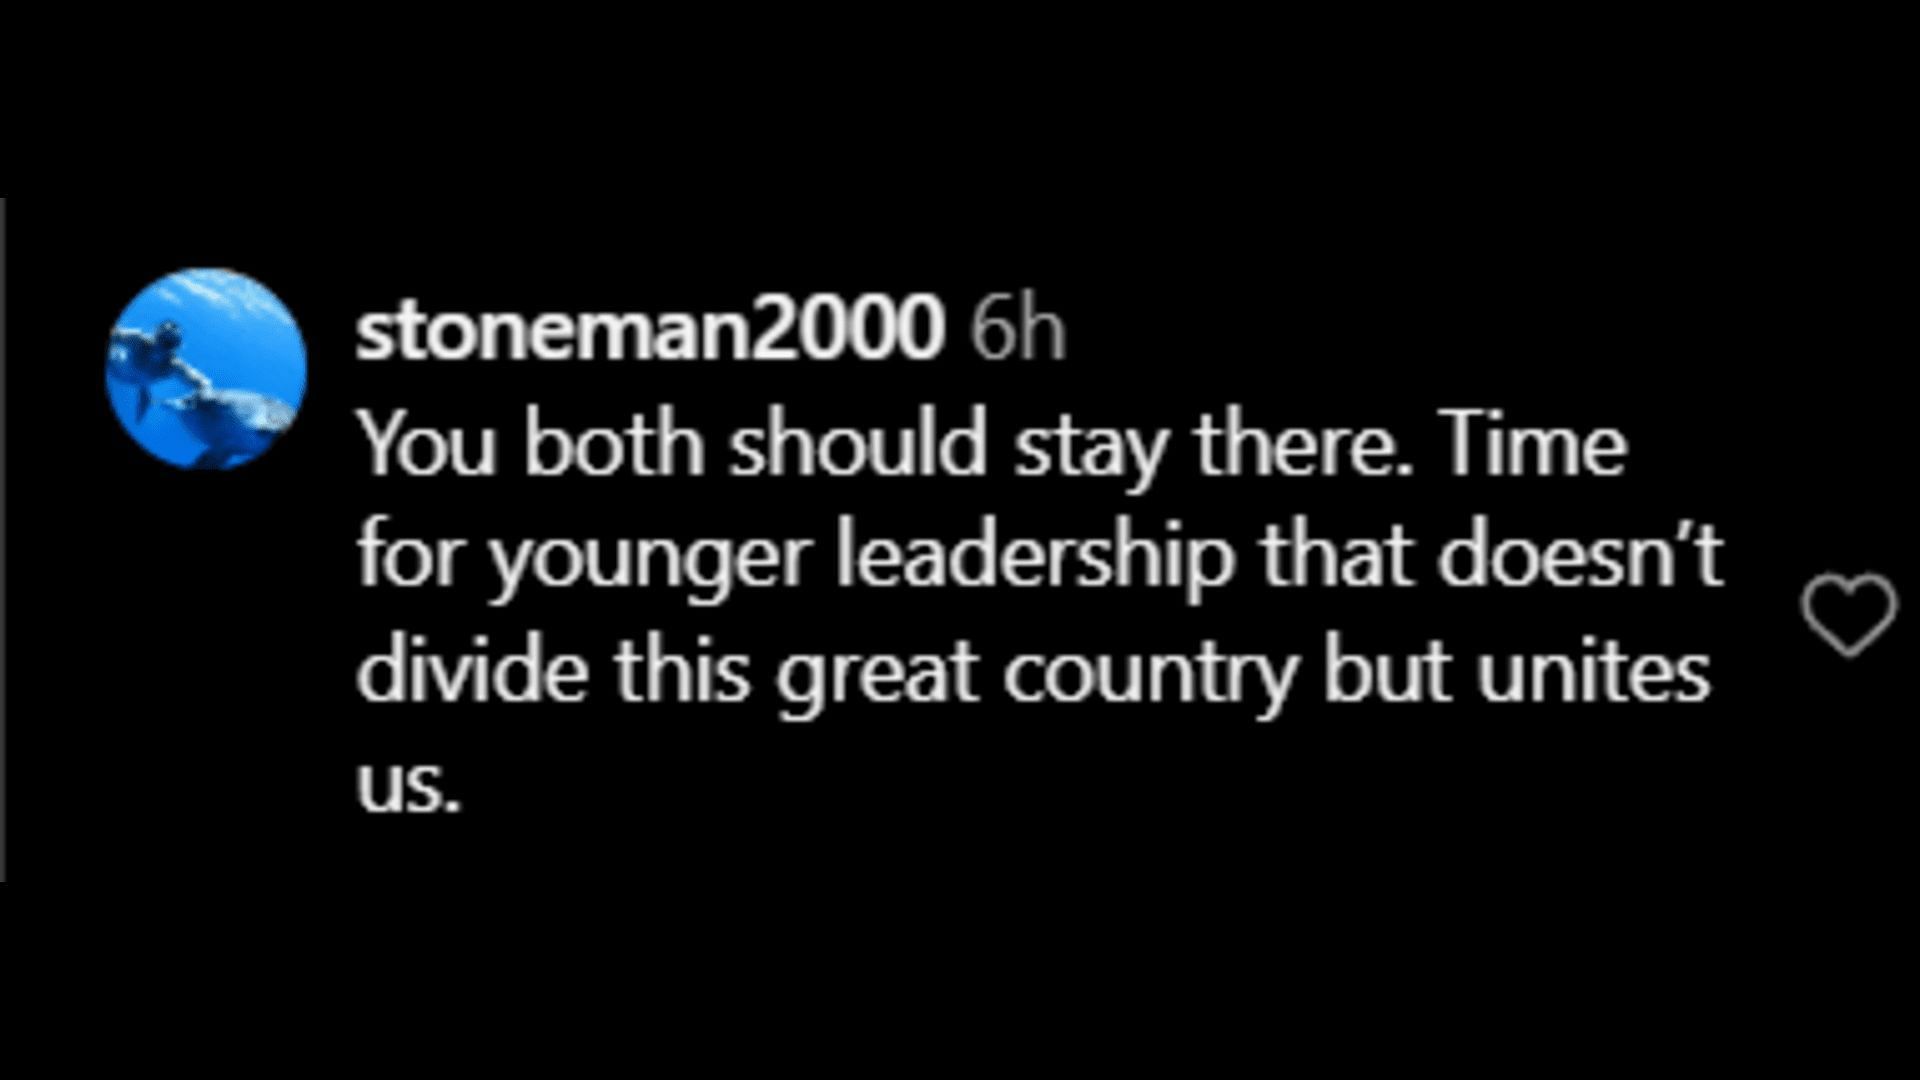 A netizen suggesting both Trump and Biden step down from presidential candidacy. (Image via Instagram/ stoneman2000)